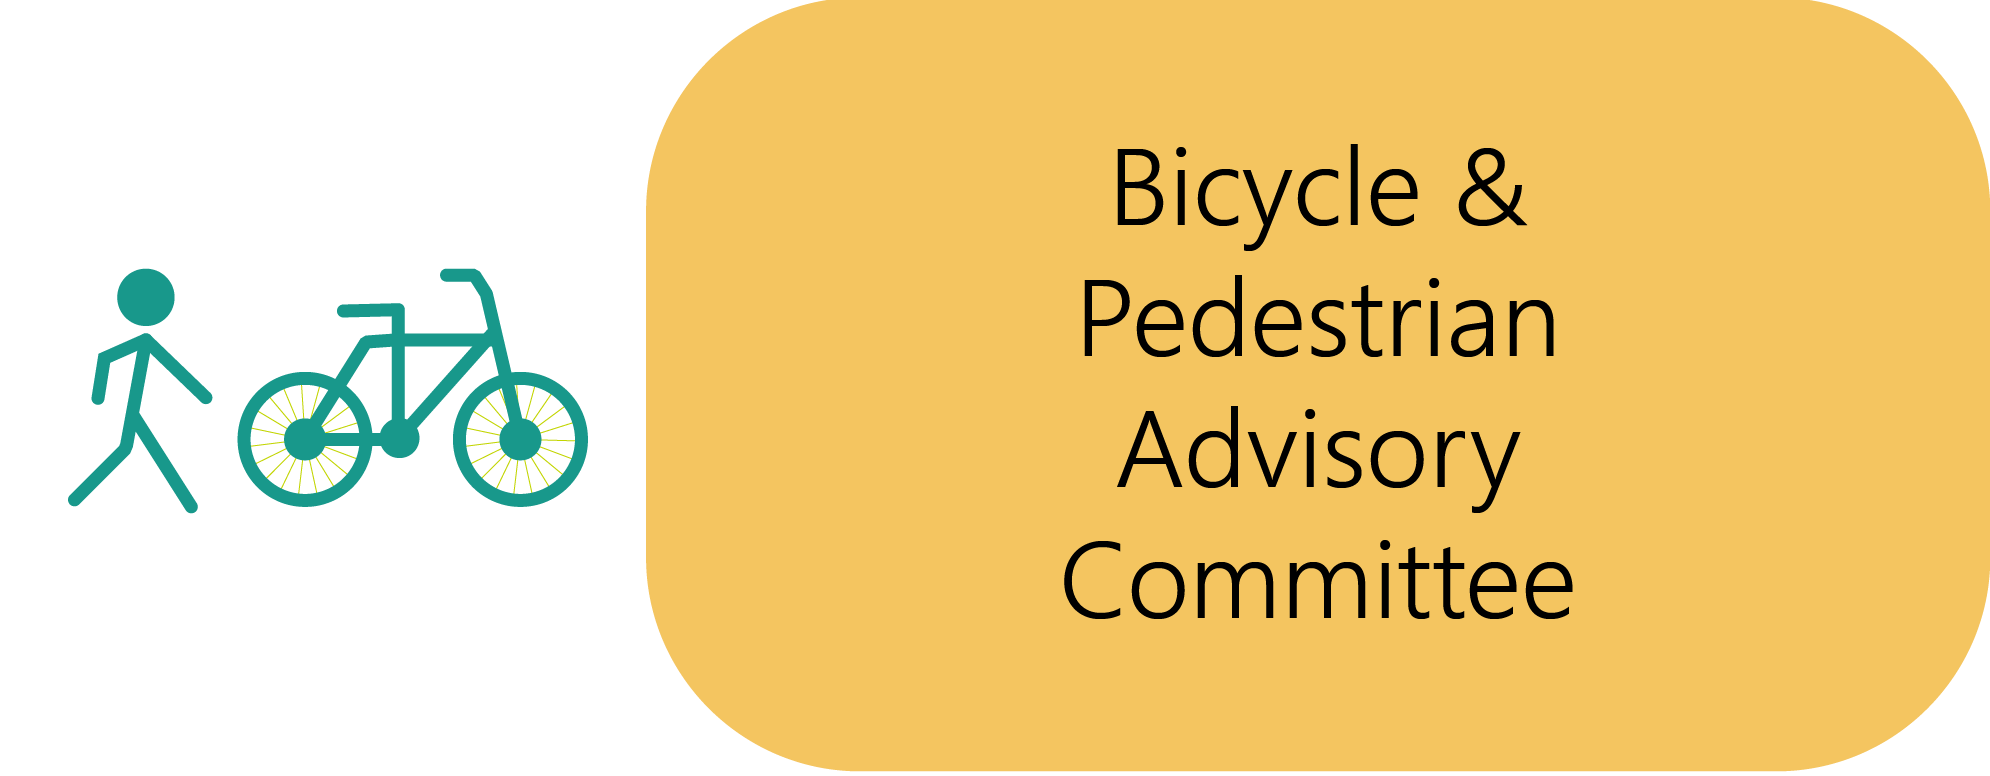 AMATS Bicycle and Pedestrian Advisory Committee logo_a person and a bike